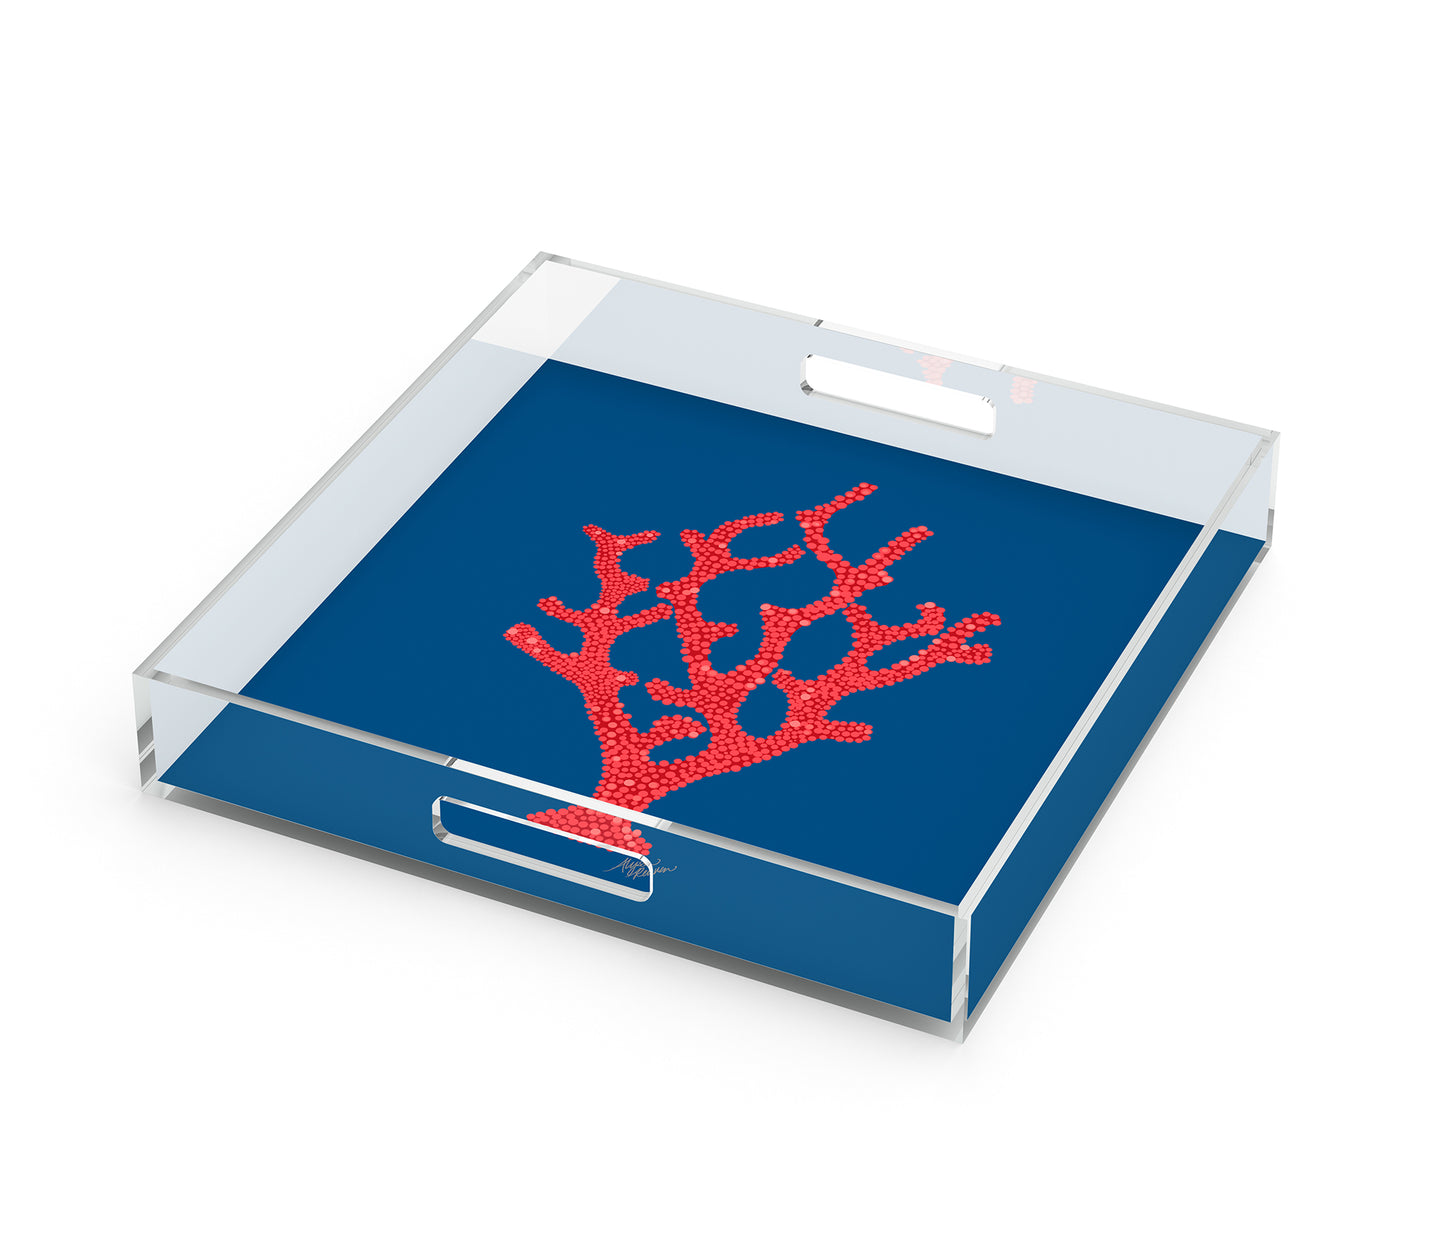 Sea Coral Art Decorative Serving Tray, Red & Navy Blue, 12" x 12"